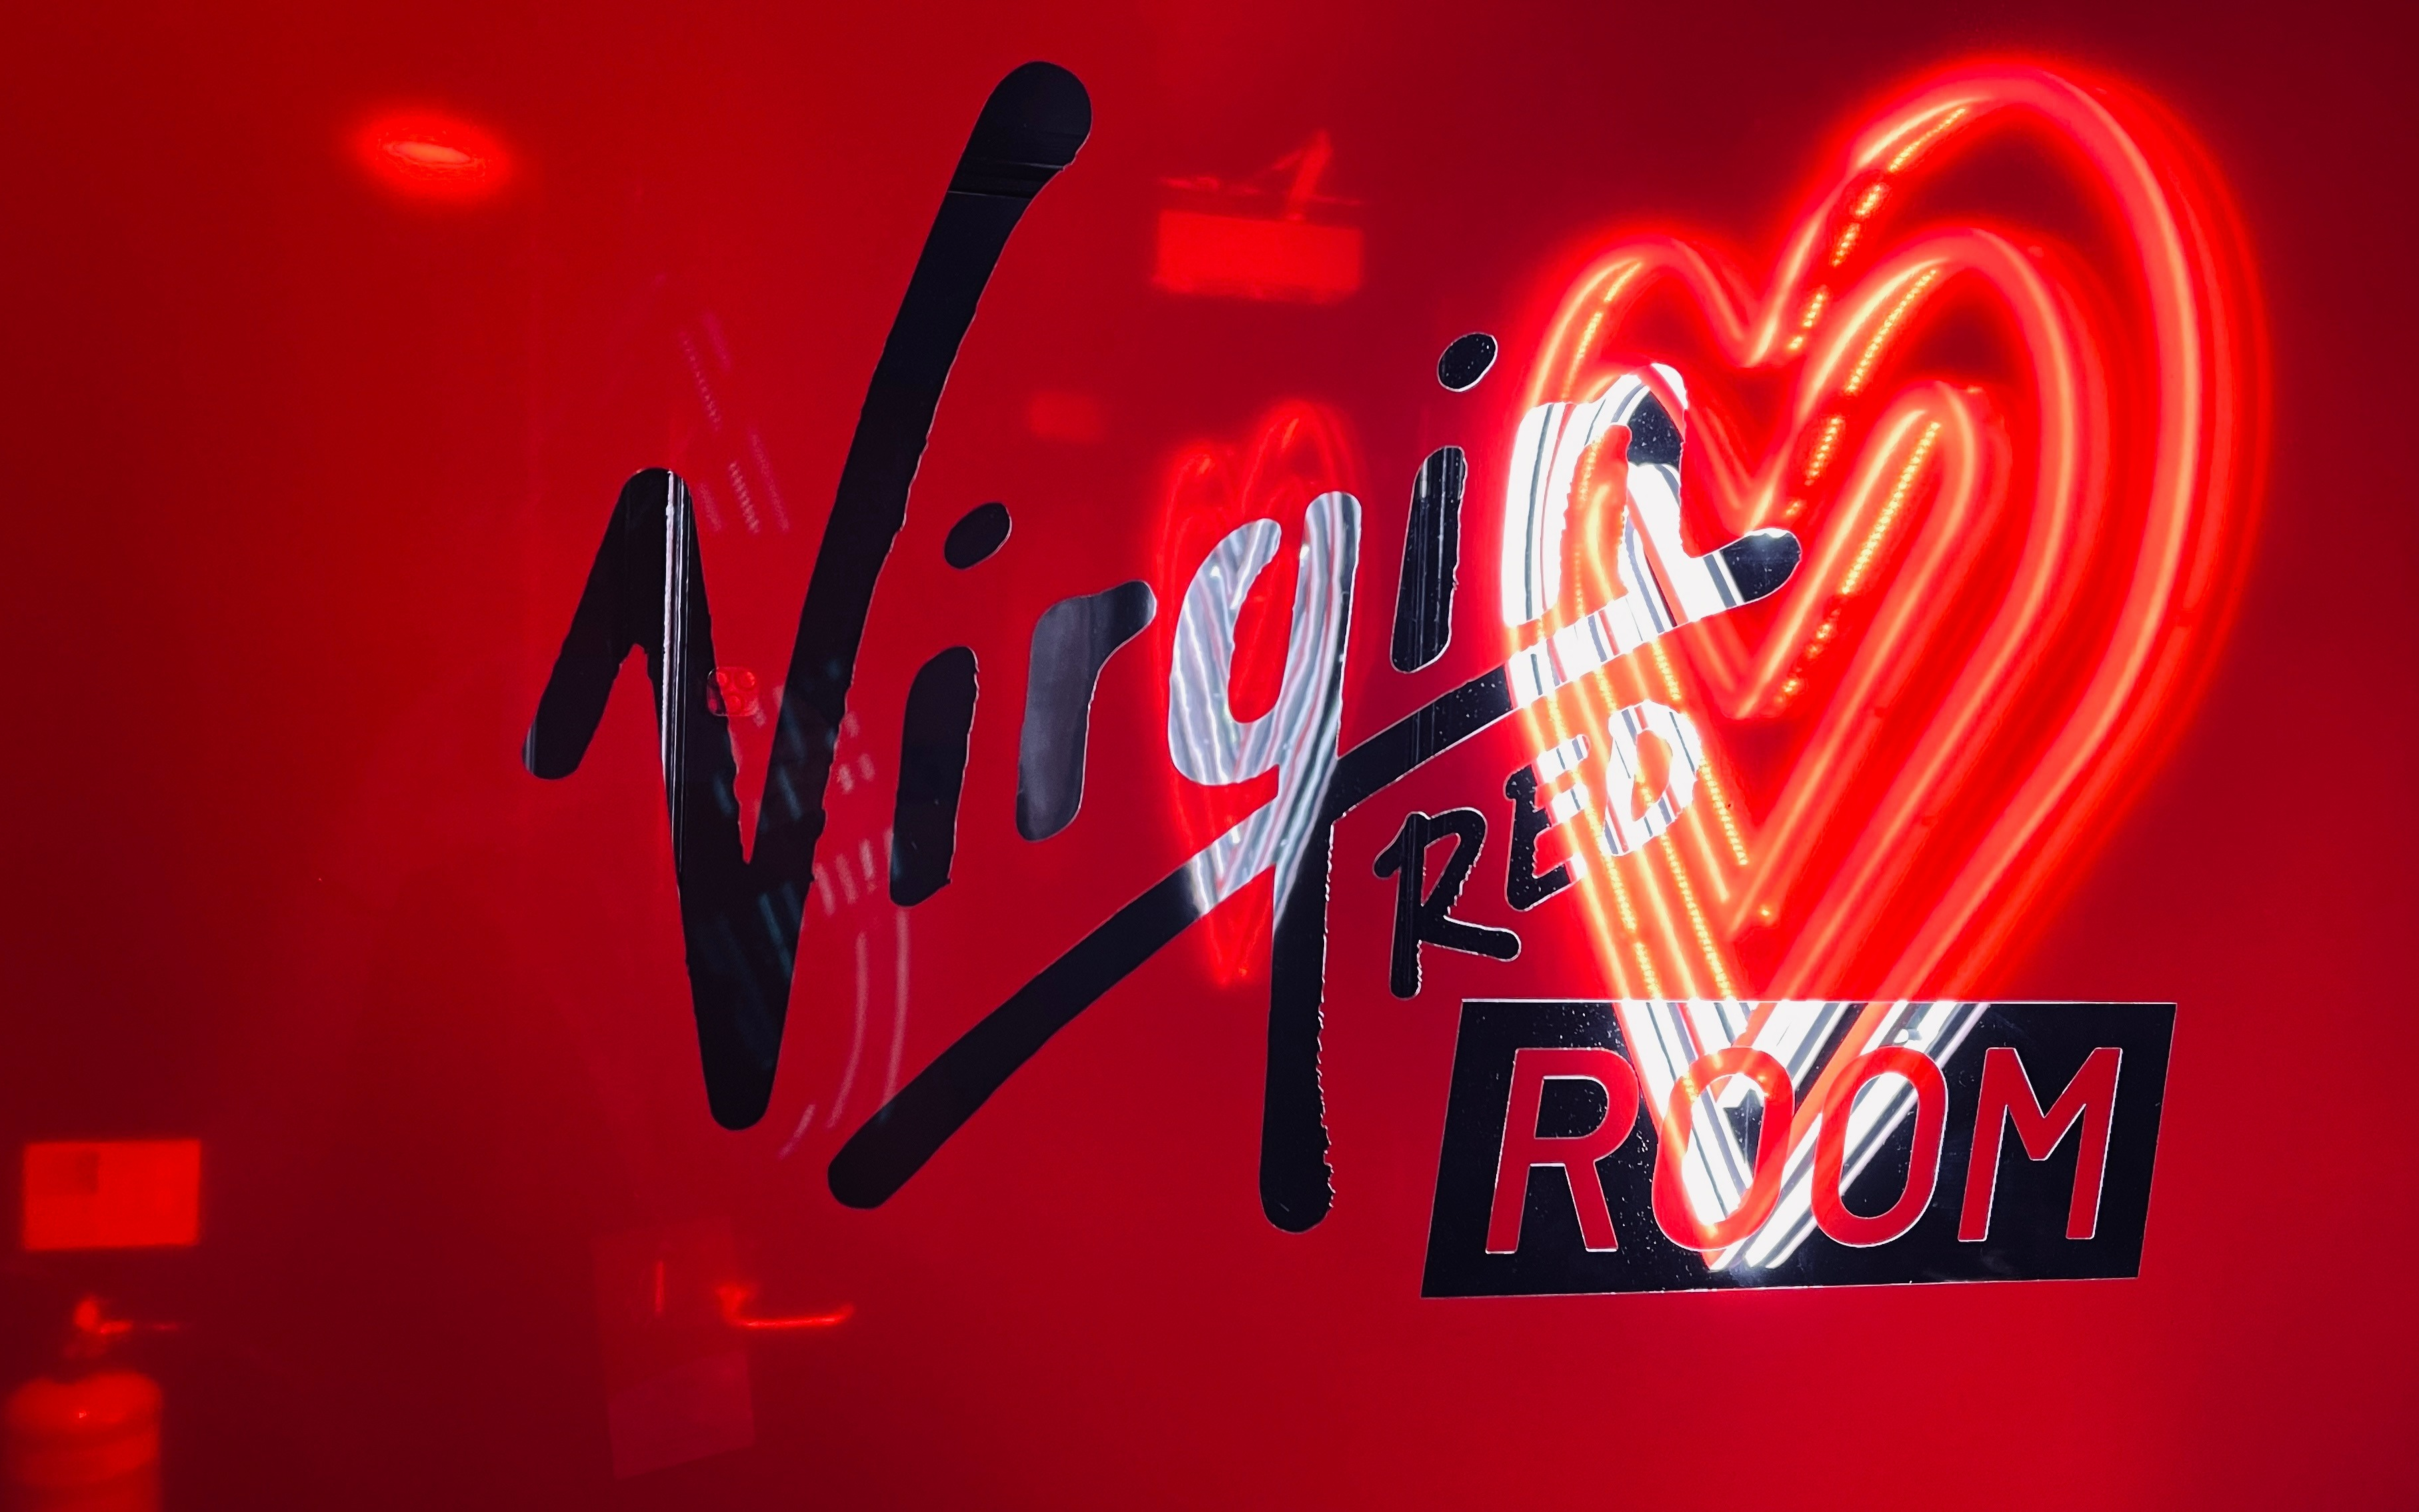 Image of the sign at the Virgin Red Room at Manchester's AO Arena.